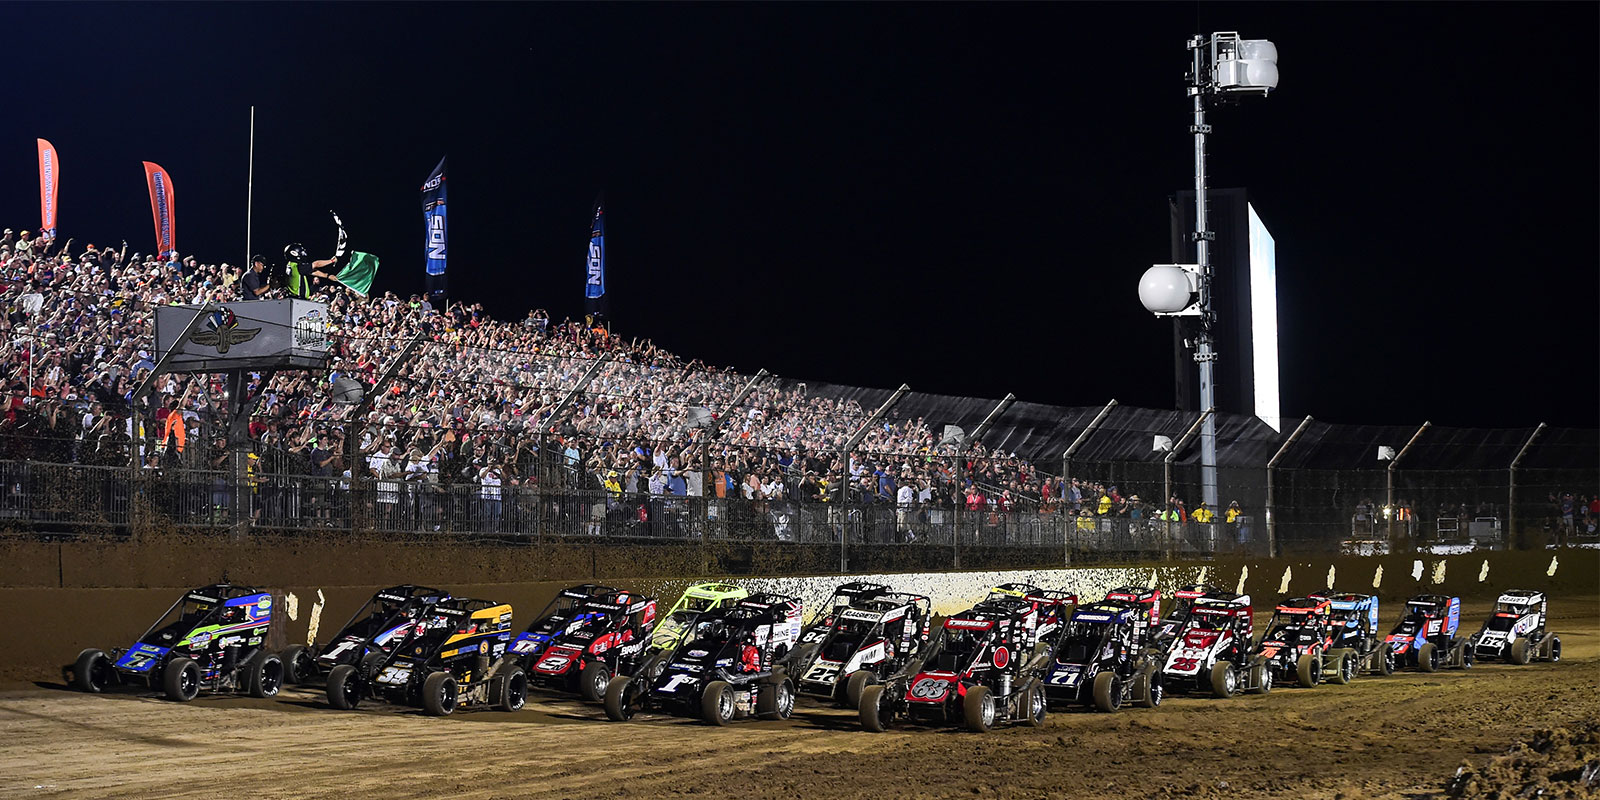 BC39 Attracts Top Drivers from USAC, NASCAR, INDYCAR in Race for Glory